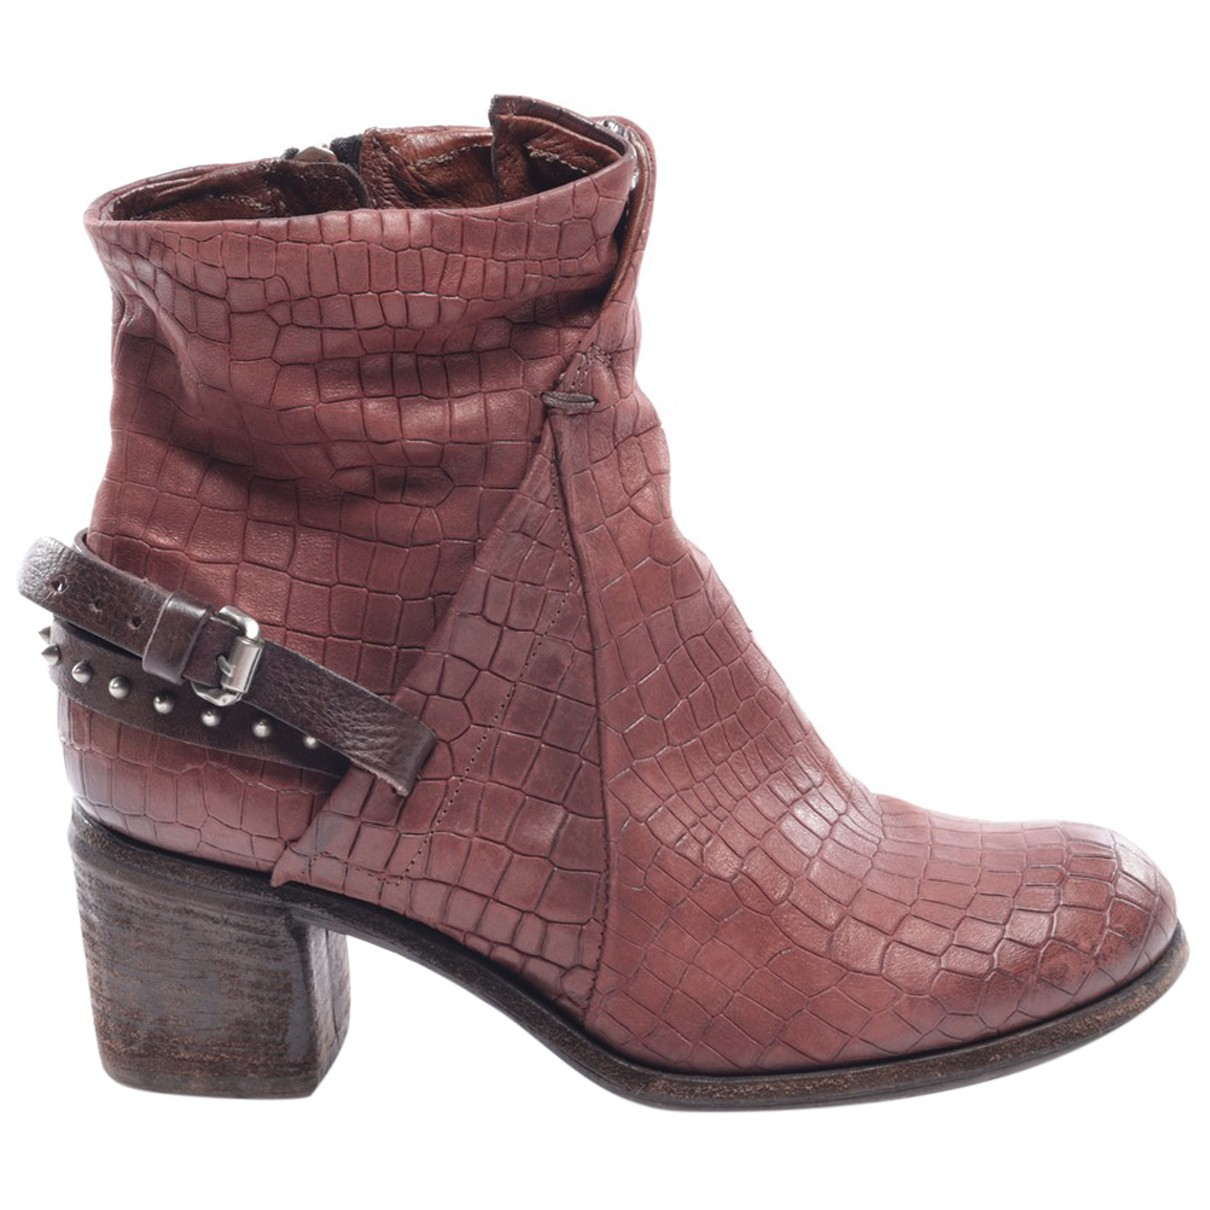 Leather Max 45% OFF ankle online shopping boots